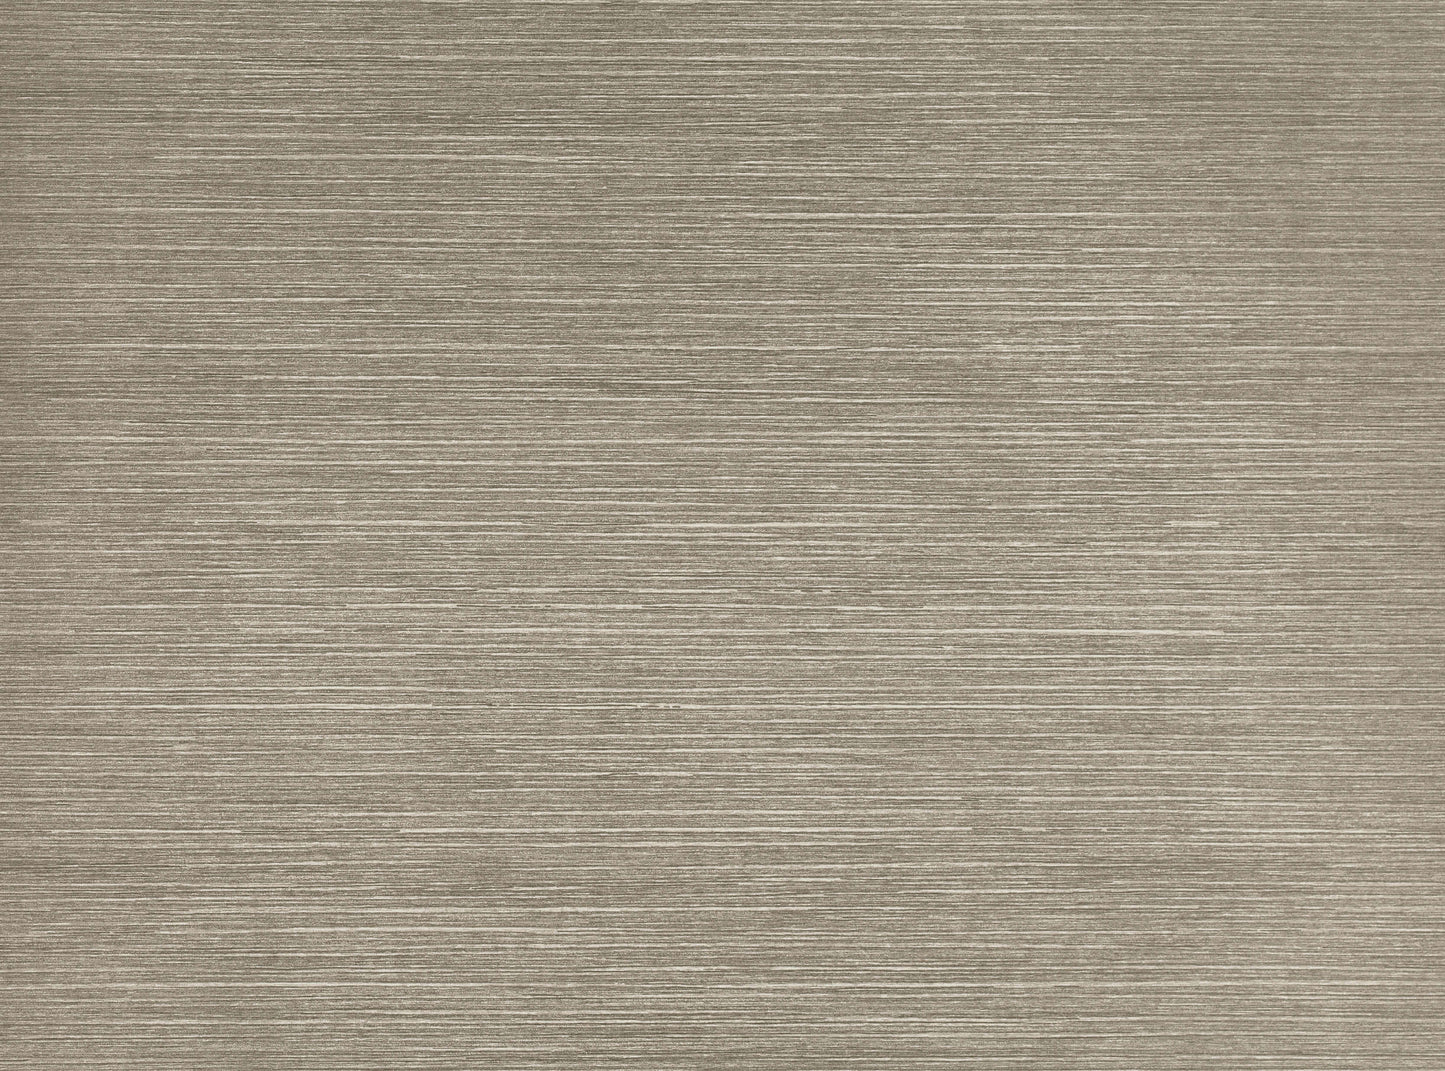 Romo Pica Wallcovering